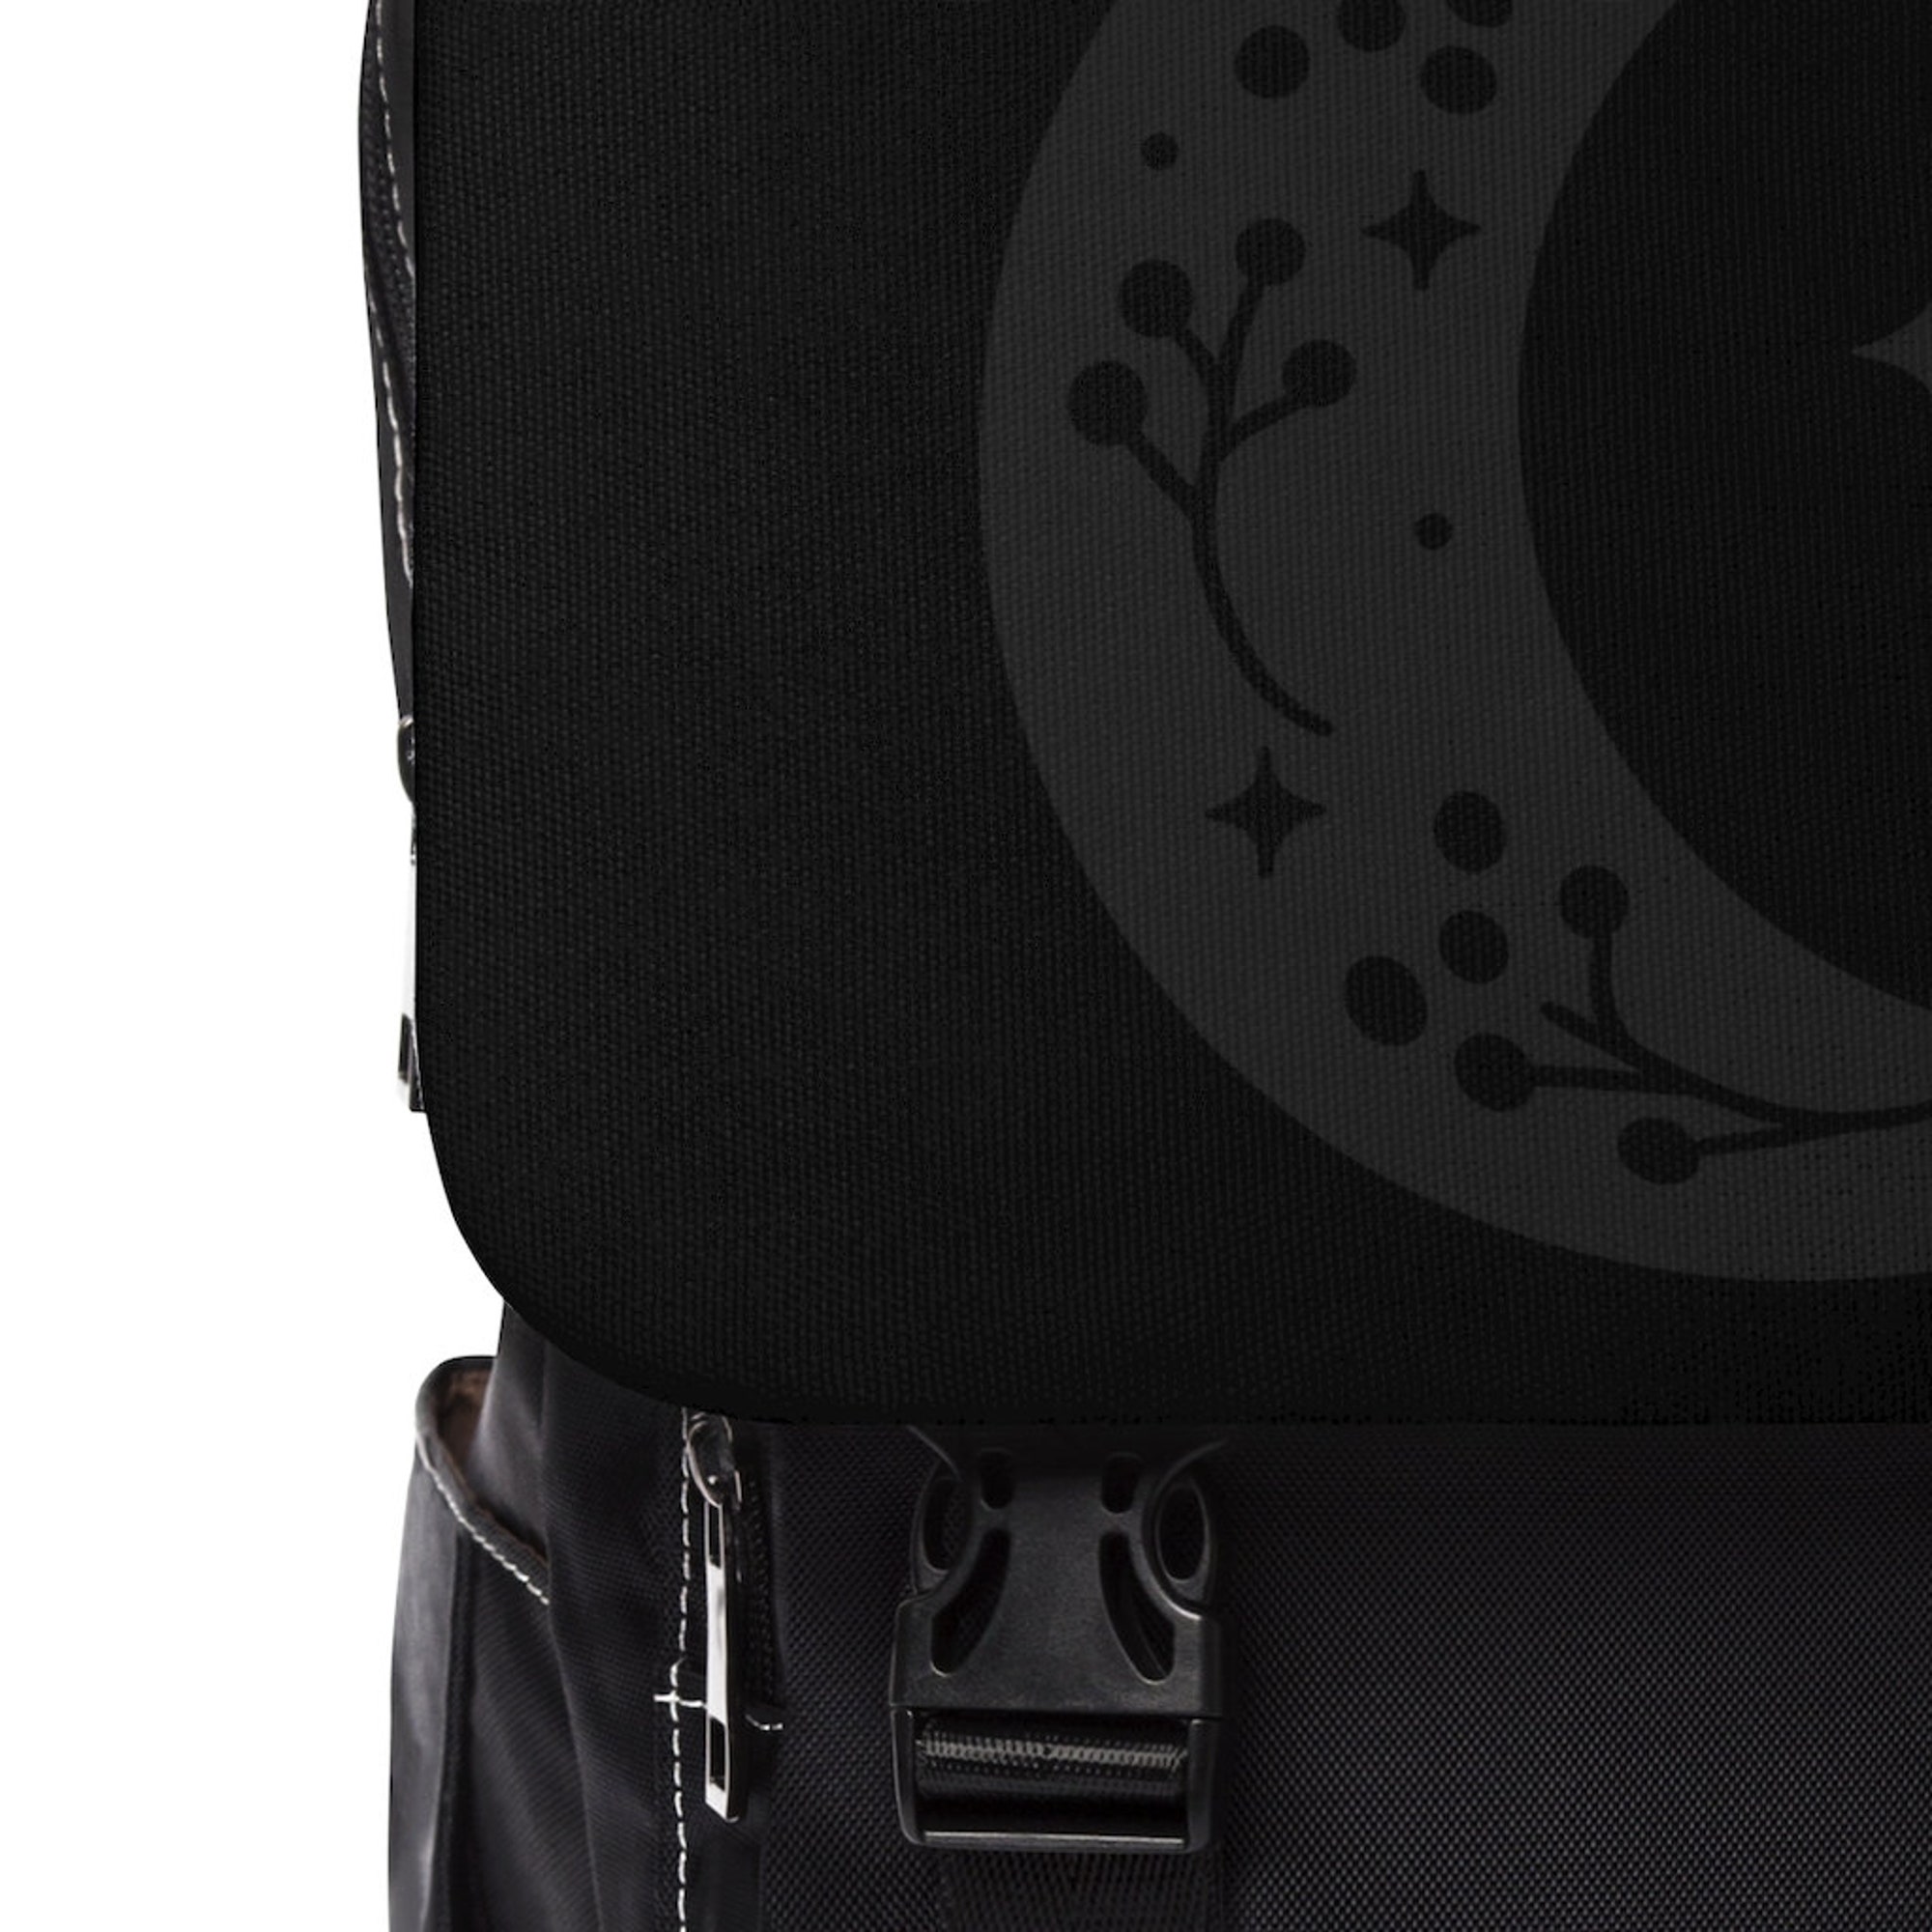 Goth Moon Occult Gothic Unisex Casual Shoulder Backpack